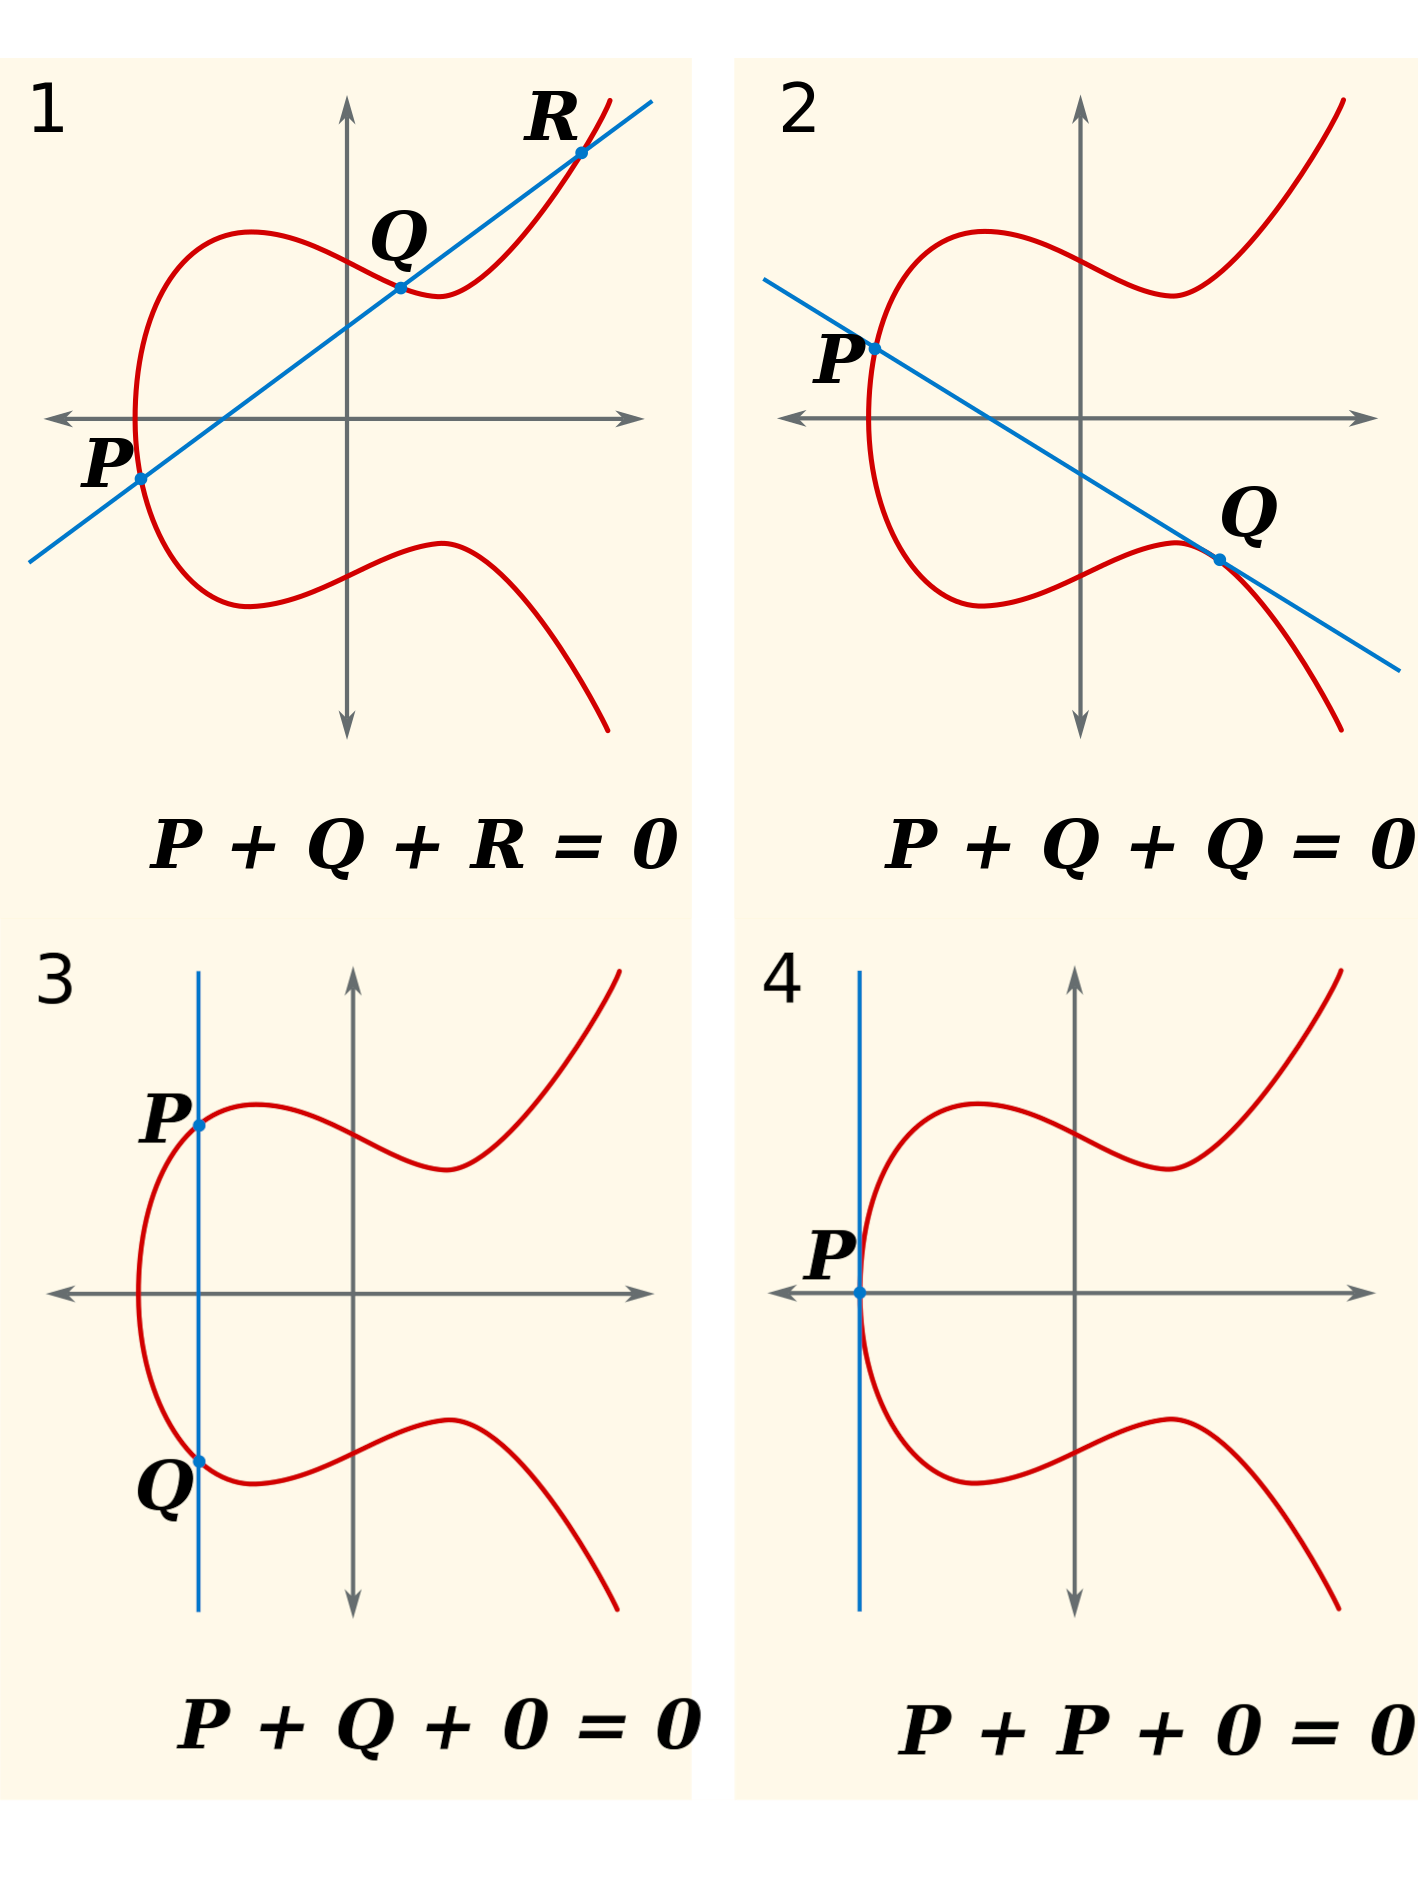 Addition over an elliptic curve